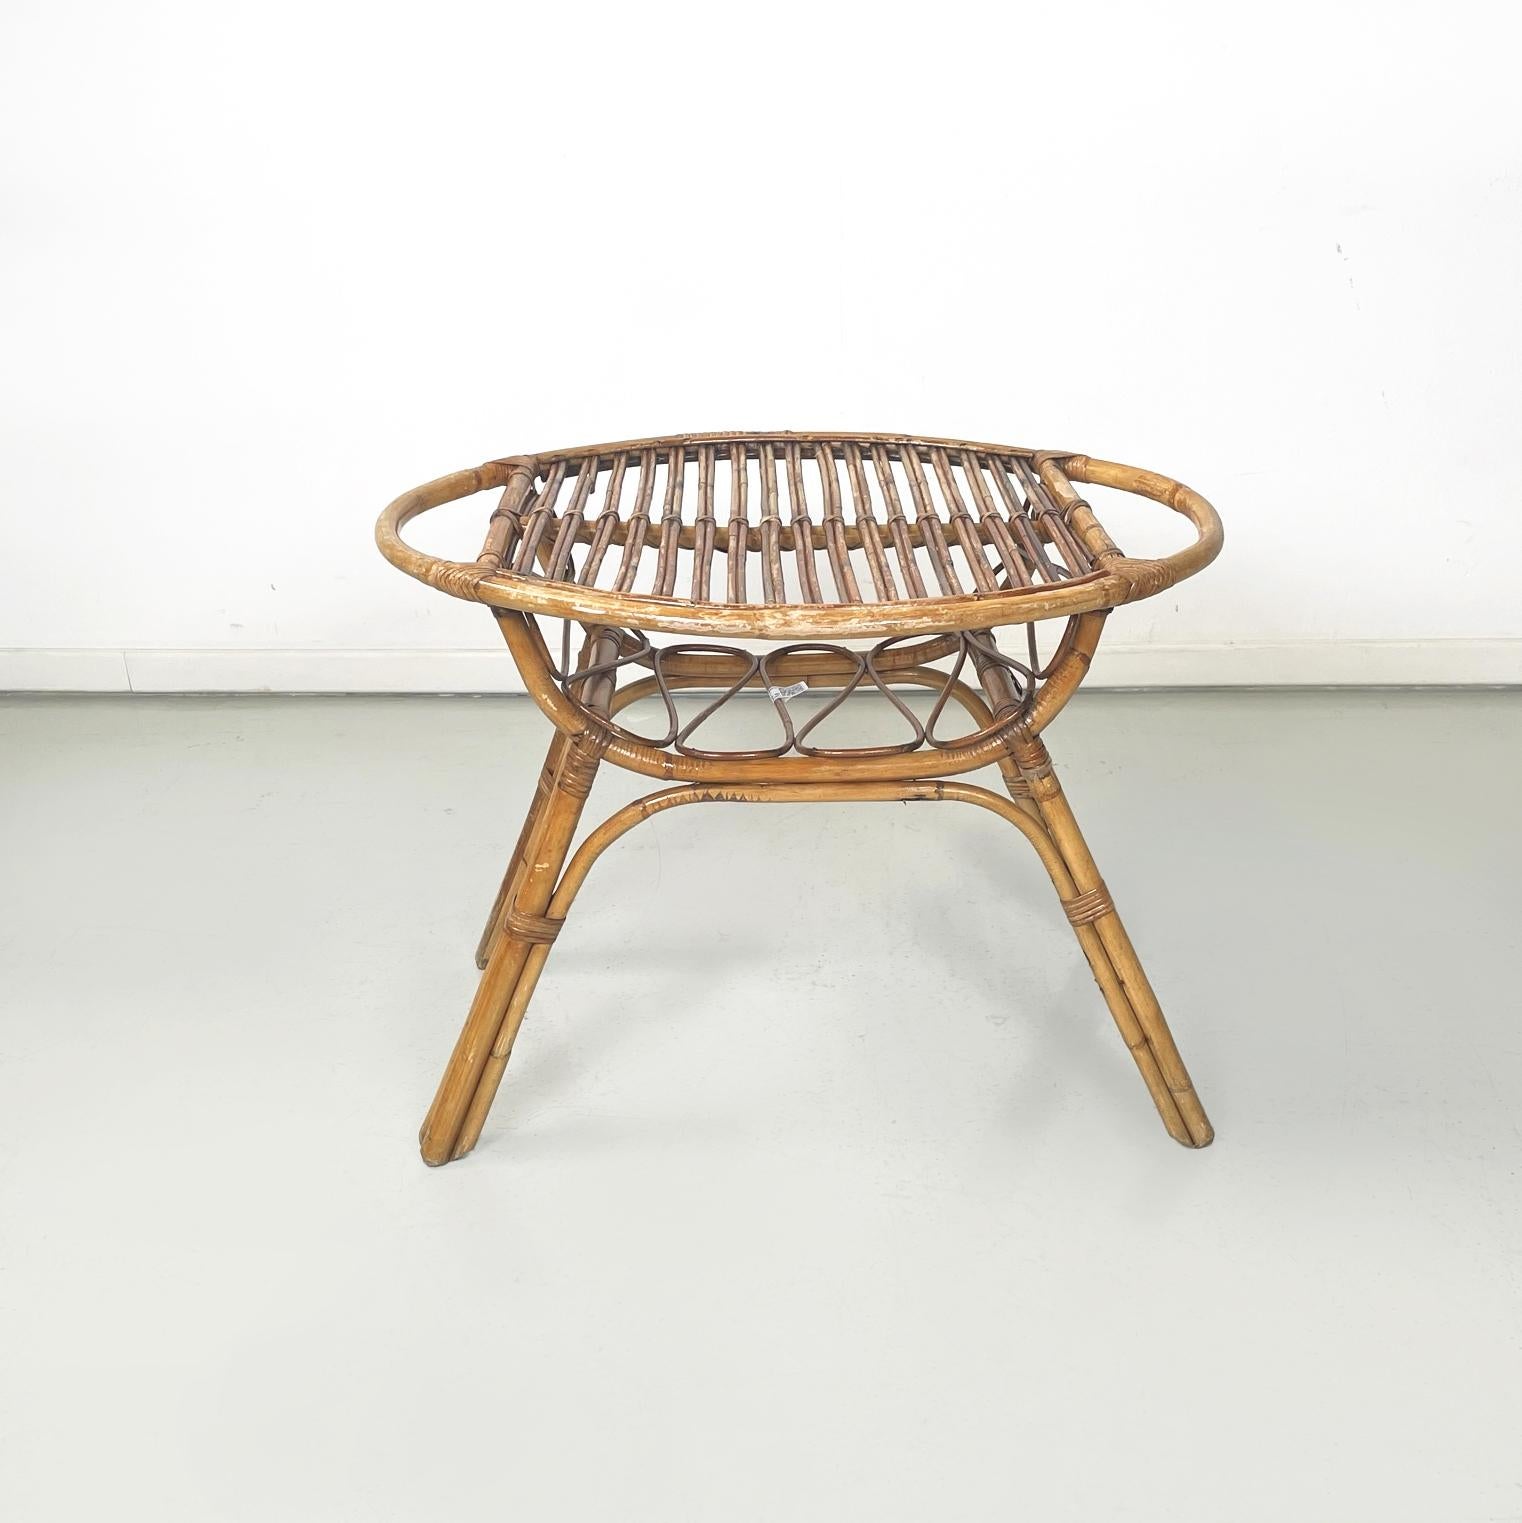 Italian mid-century modern Garden oval coffee table in rattan, 1960s
Coffee table entirely in rattan with elegant weaves. The coffee table has an oval top and a lower storage shelf with a repeated curvilinear pattern. The table is suitable for